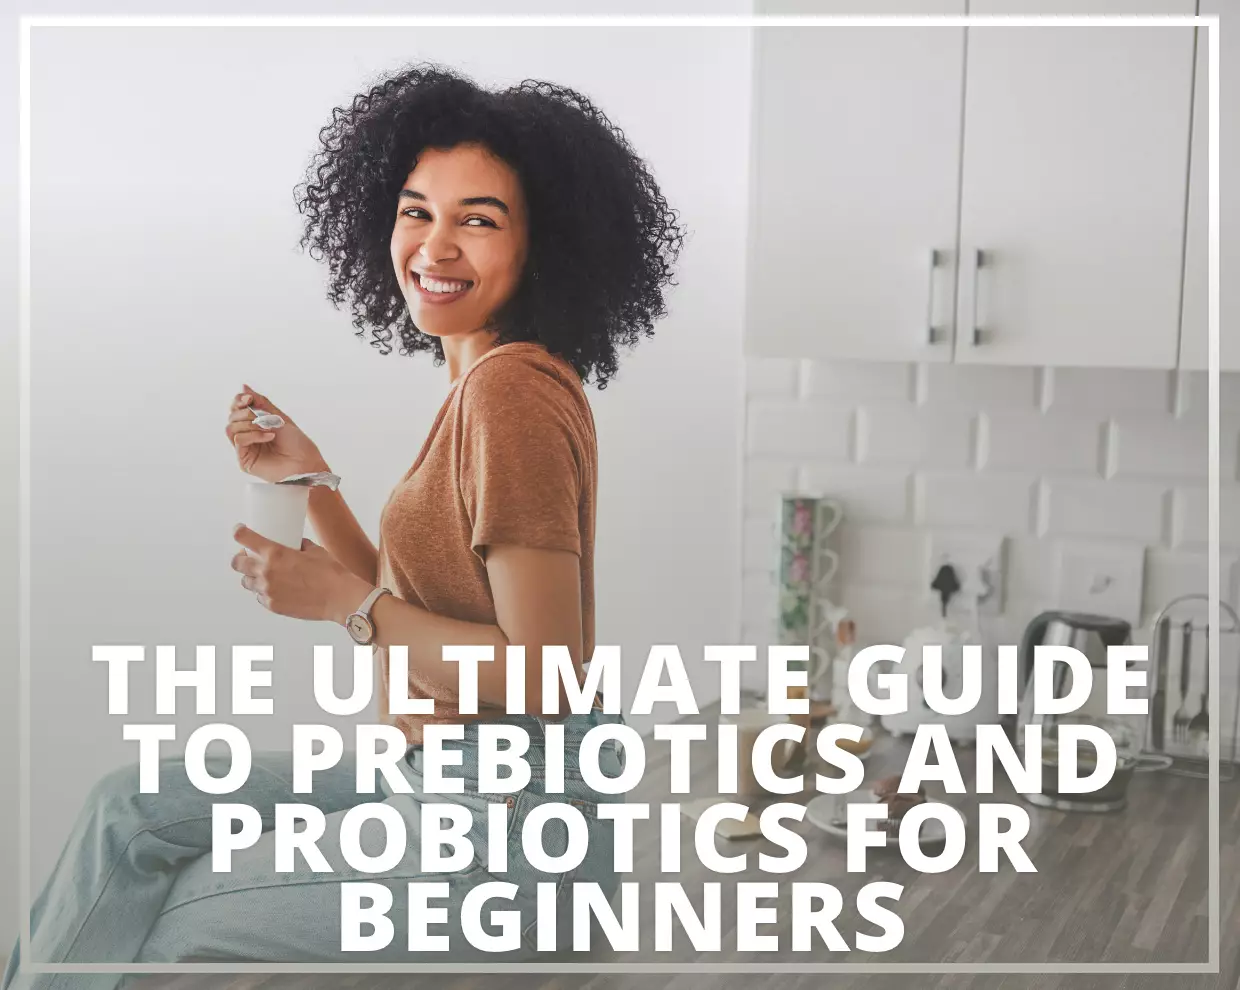 The Ultimate Guide to Prebiotics and Probiotics for Beginners